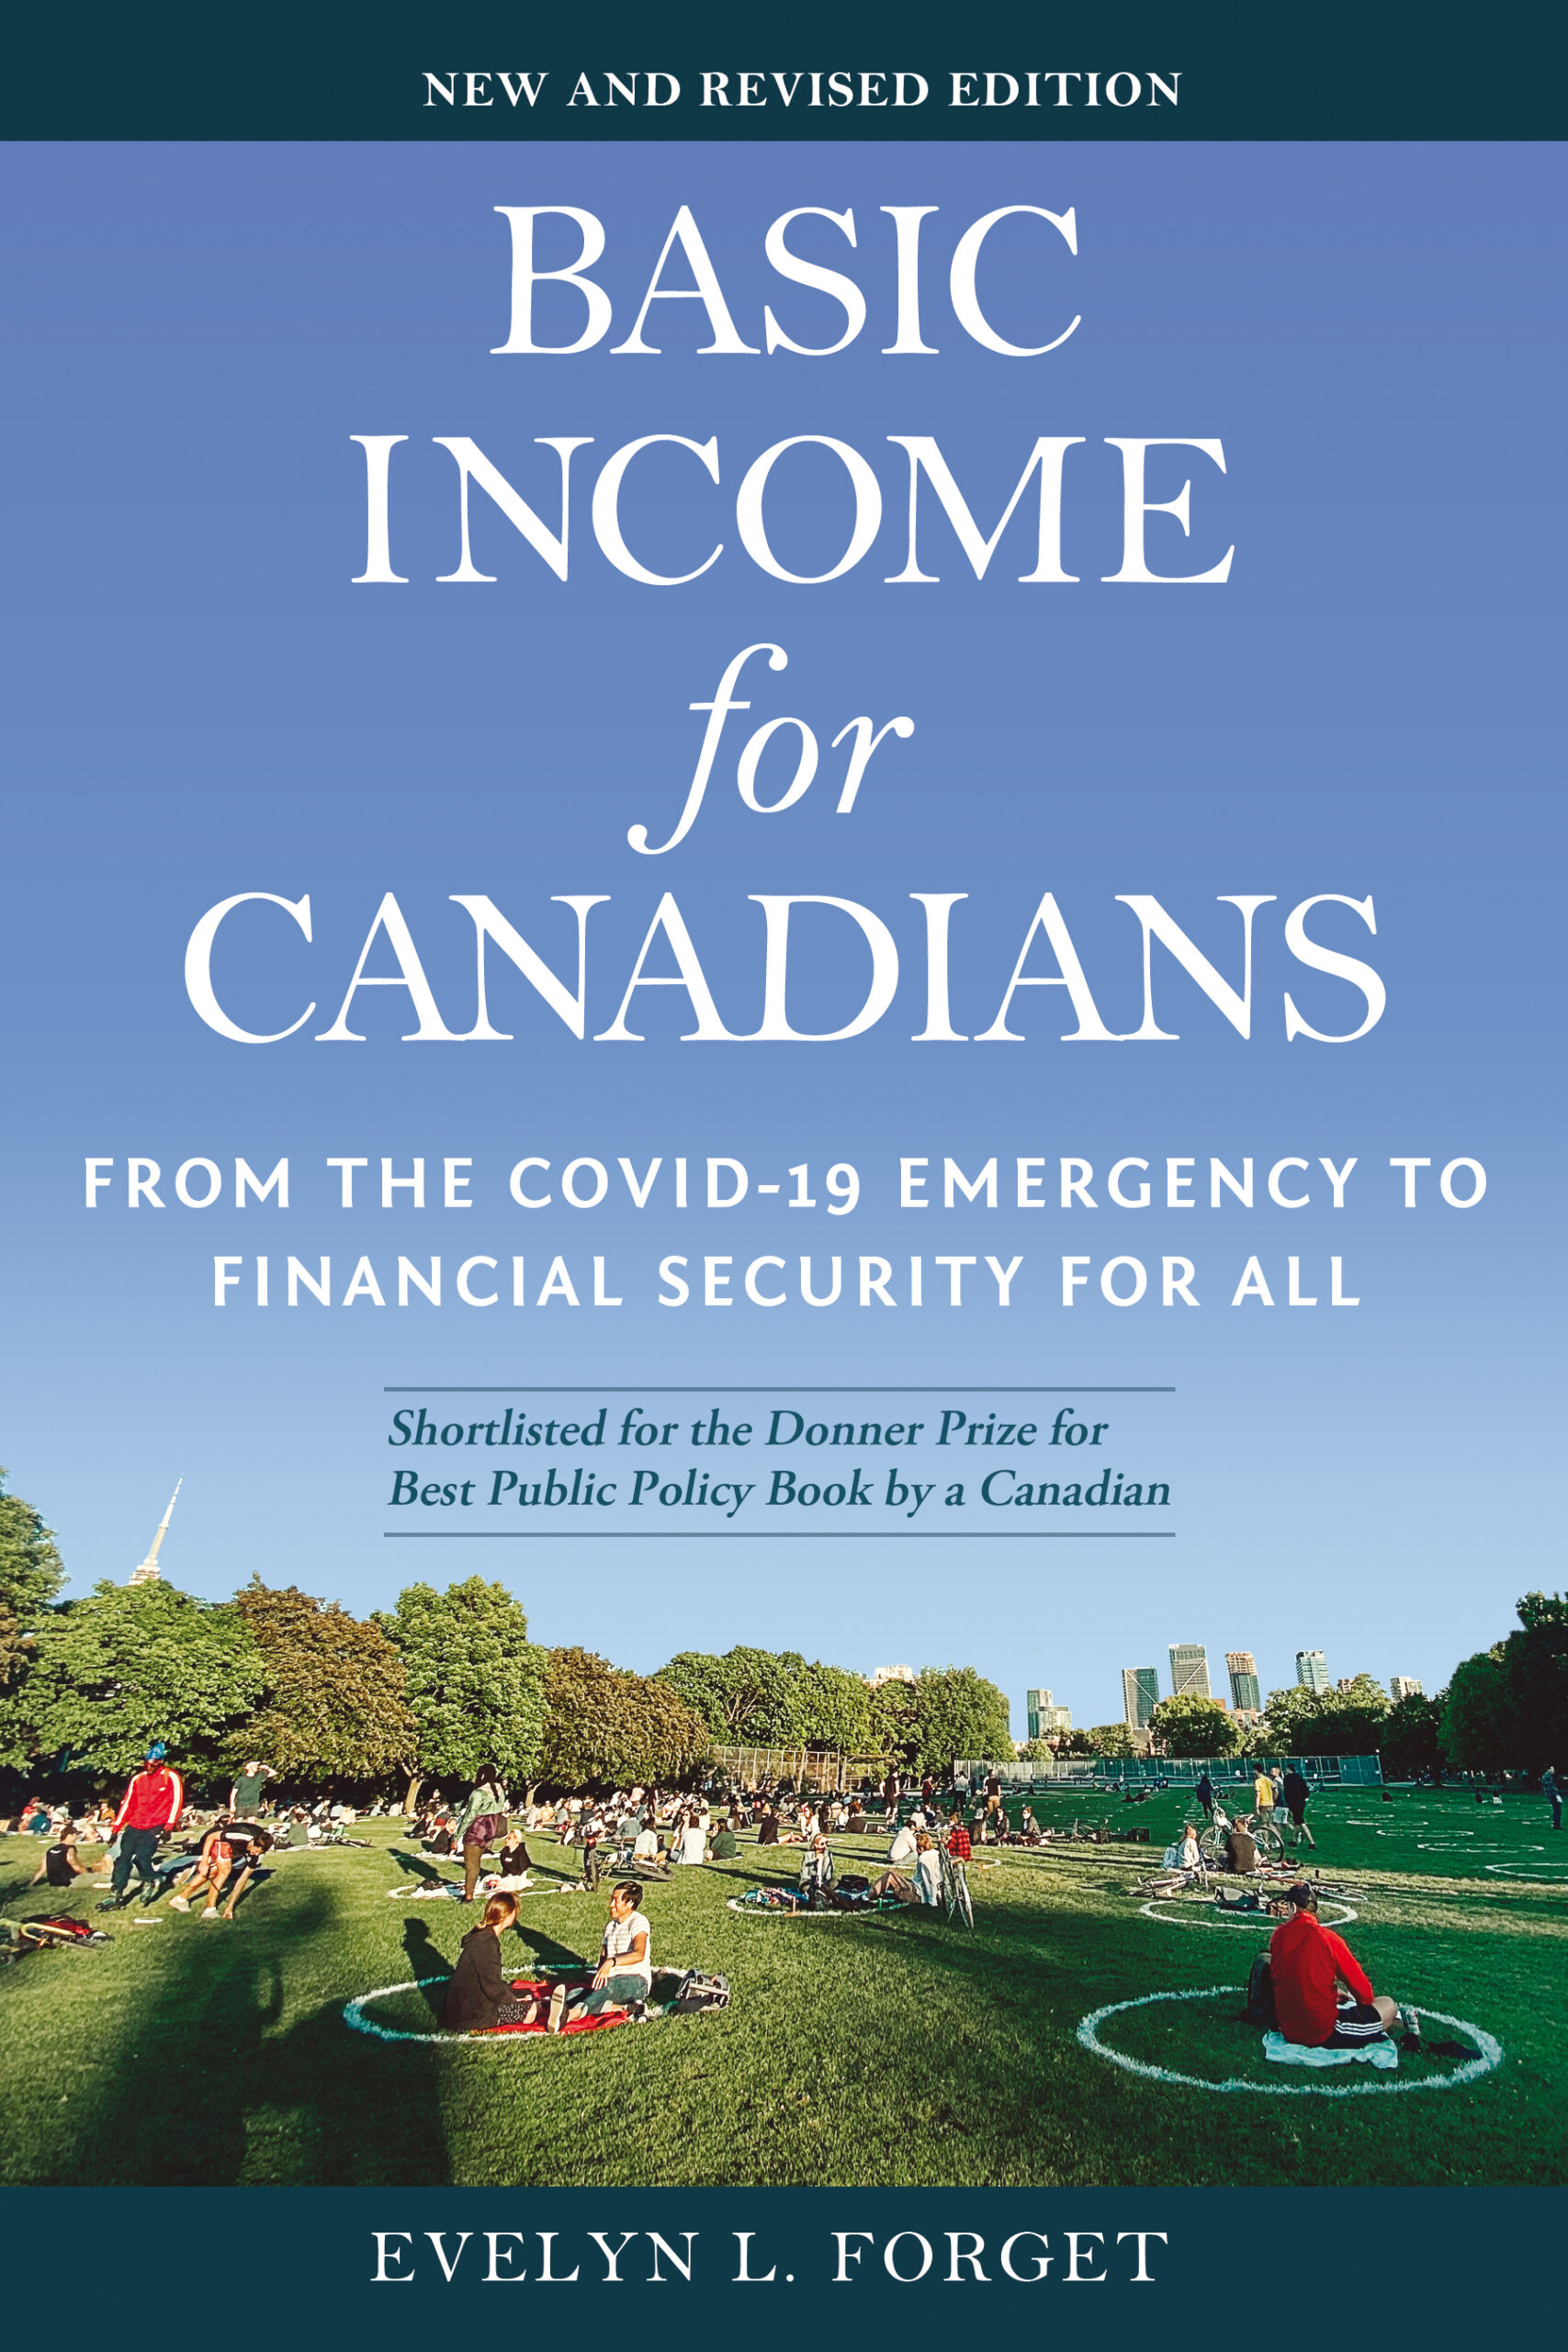 Forget, Evelyn - Basic Income for Canadians - Book Cover